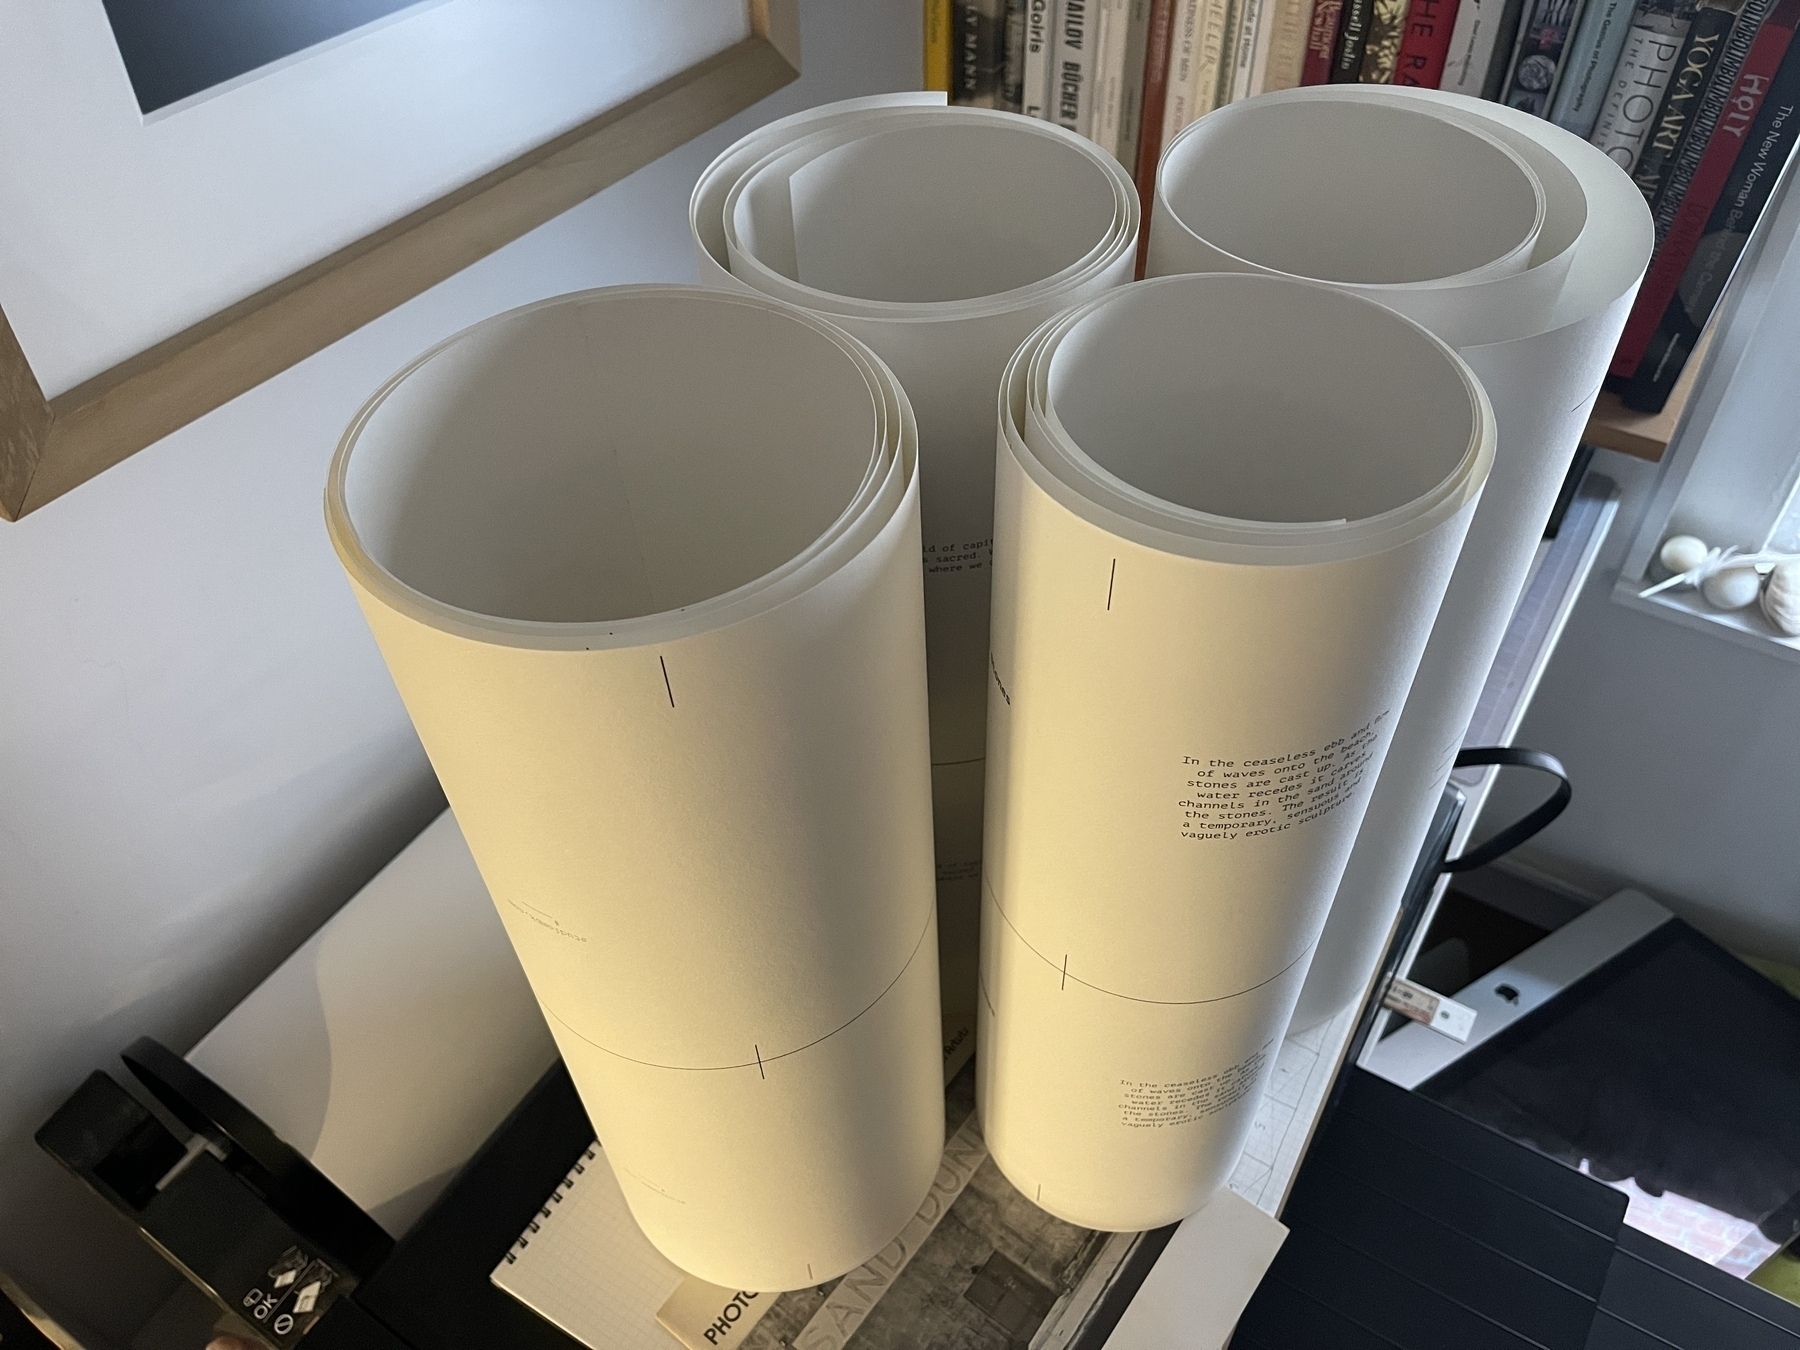 4 rolls of photo paper with books printed on them. To become accordion fold books.